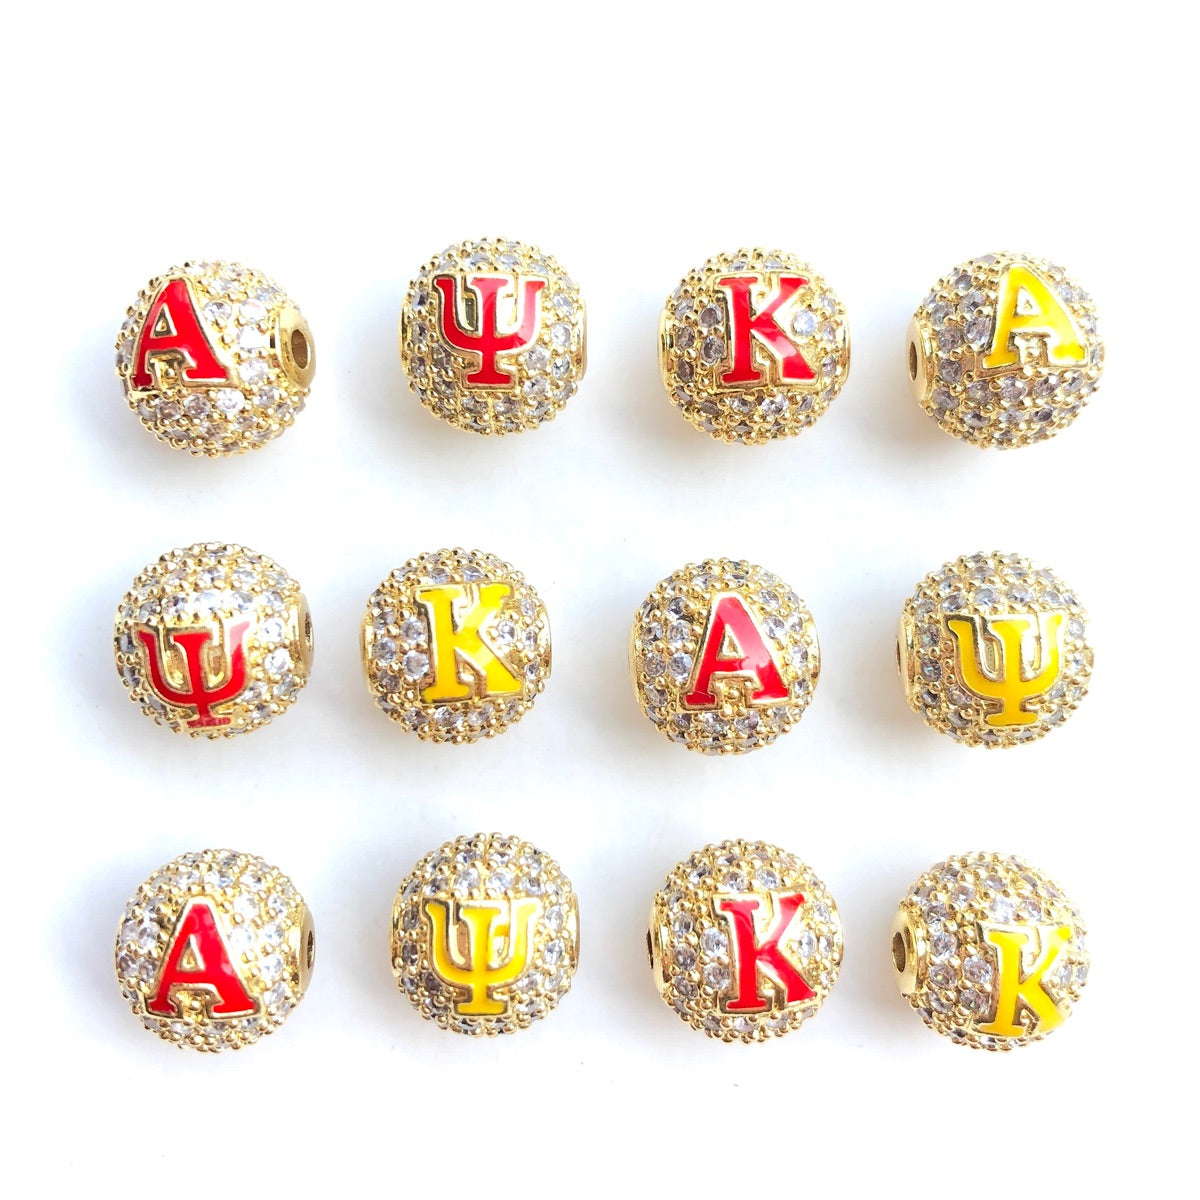 12pcs/lot 10mm Red Yellow Enamel CZ Paved Greek Letter "K", "A", "Ψ" Ball Spacers Beads Mix Gold Letters 4 Letters Each CZ Paved Spacers 10mm Beads Ball Beads Greek Letters New Spacers Arrivals Charms Beads Beyond